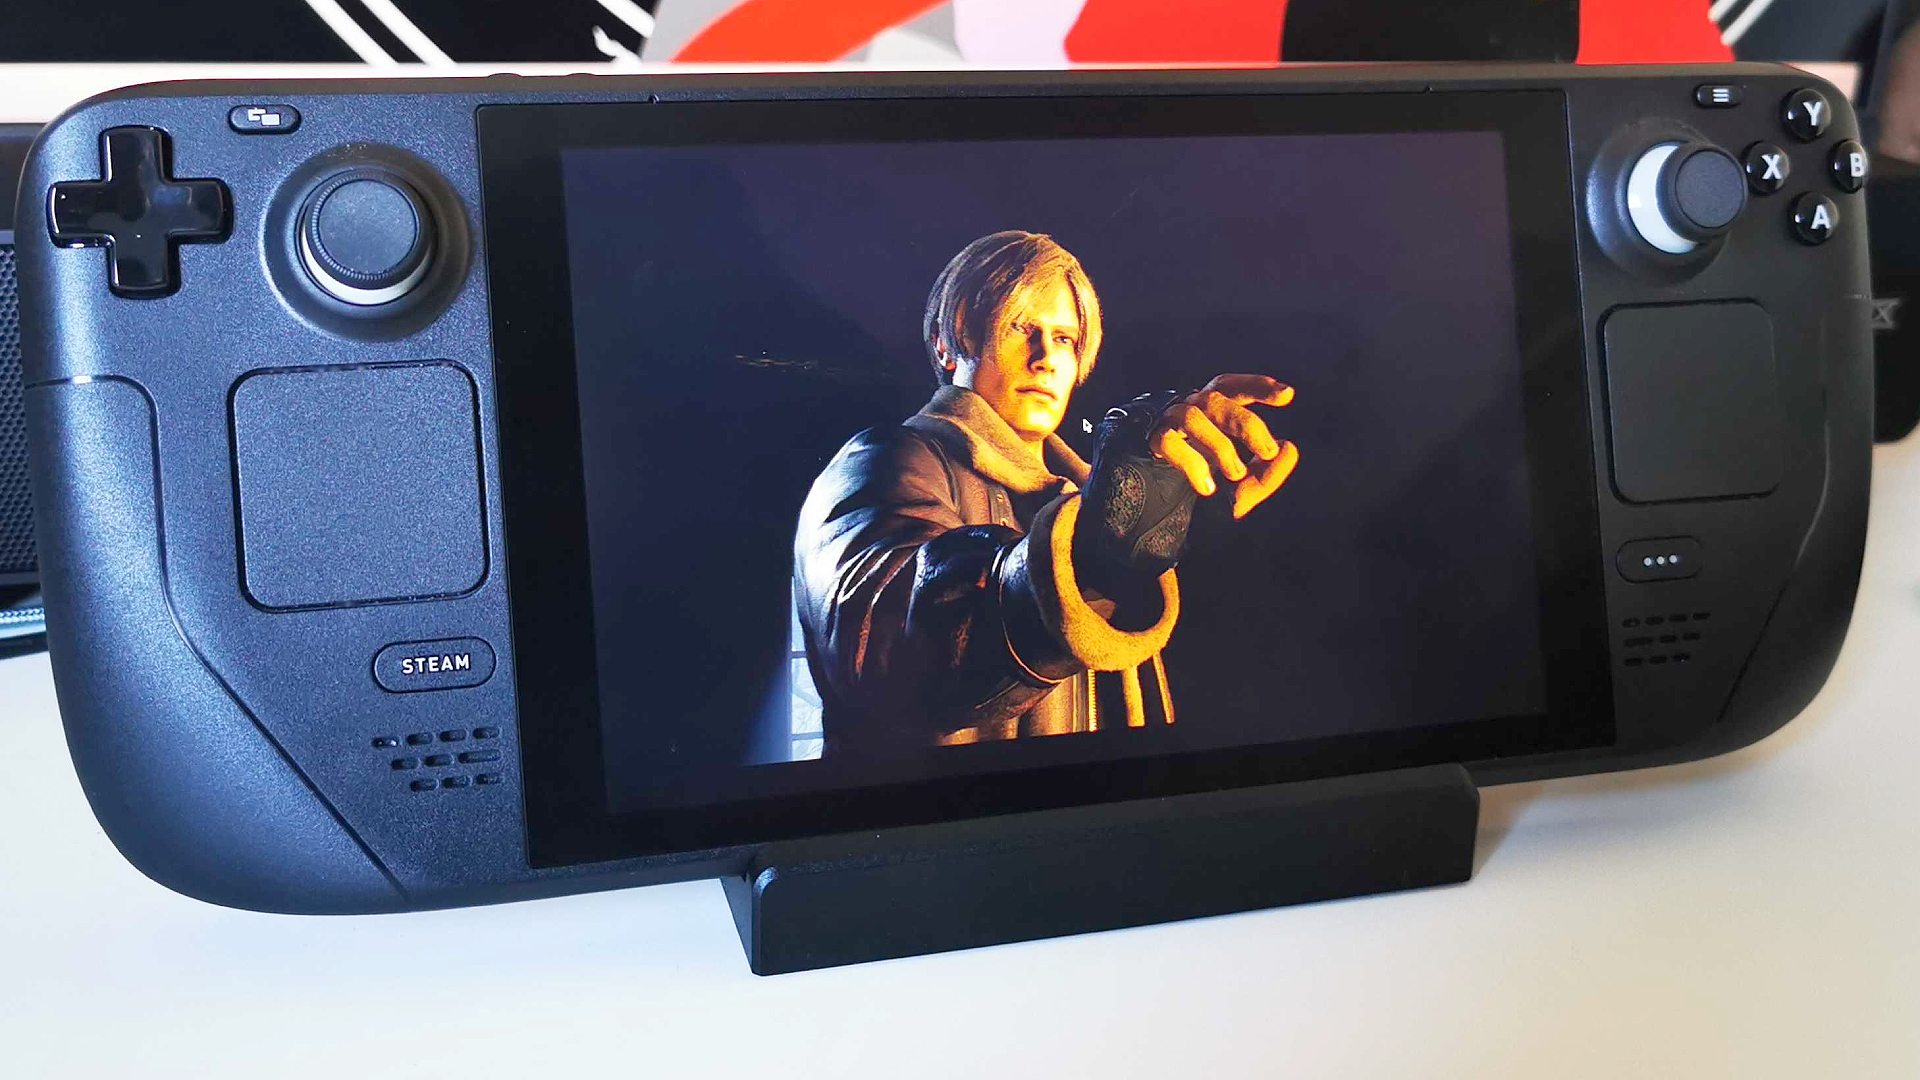 Valve Steam Deck dock review: Hanheld PC on docking station with Leon Kennedy from Resident Evil 4 Remake on screen